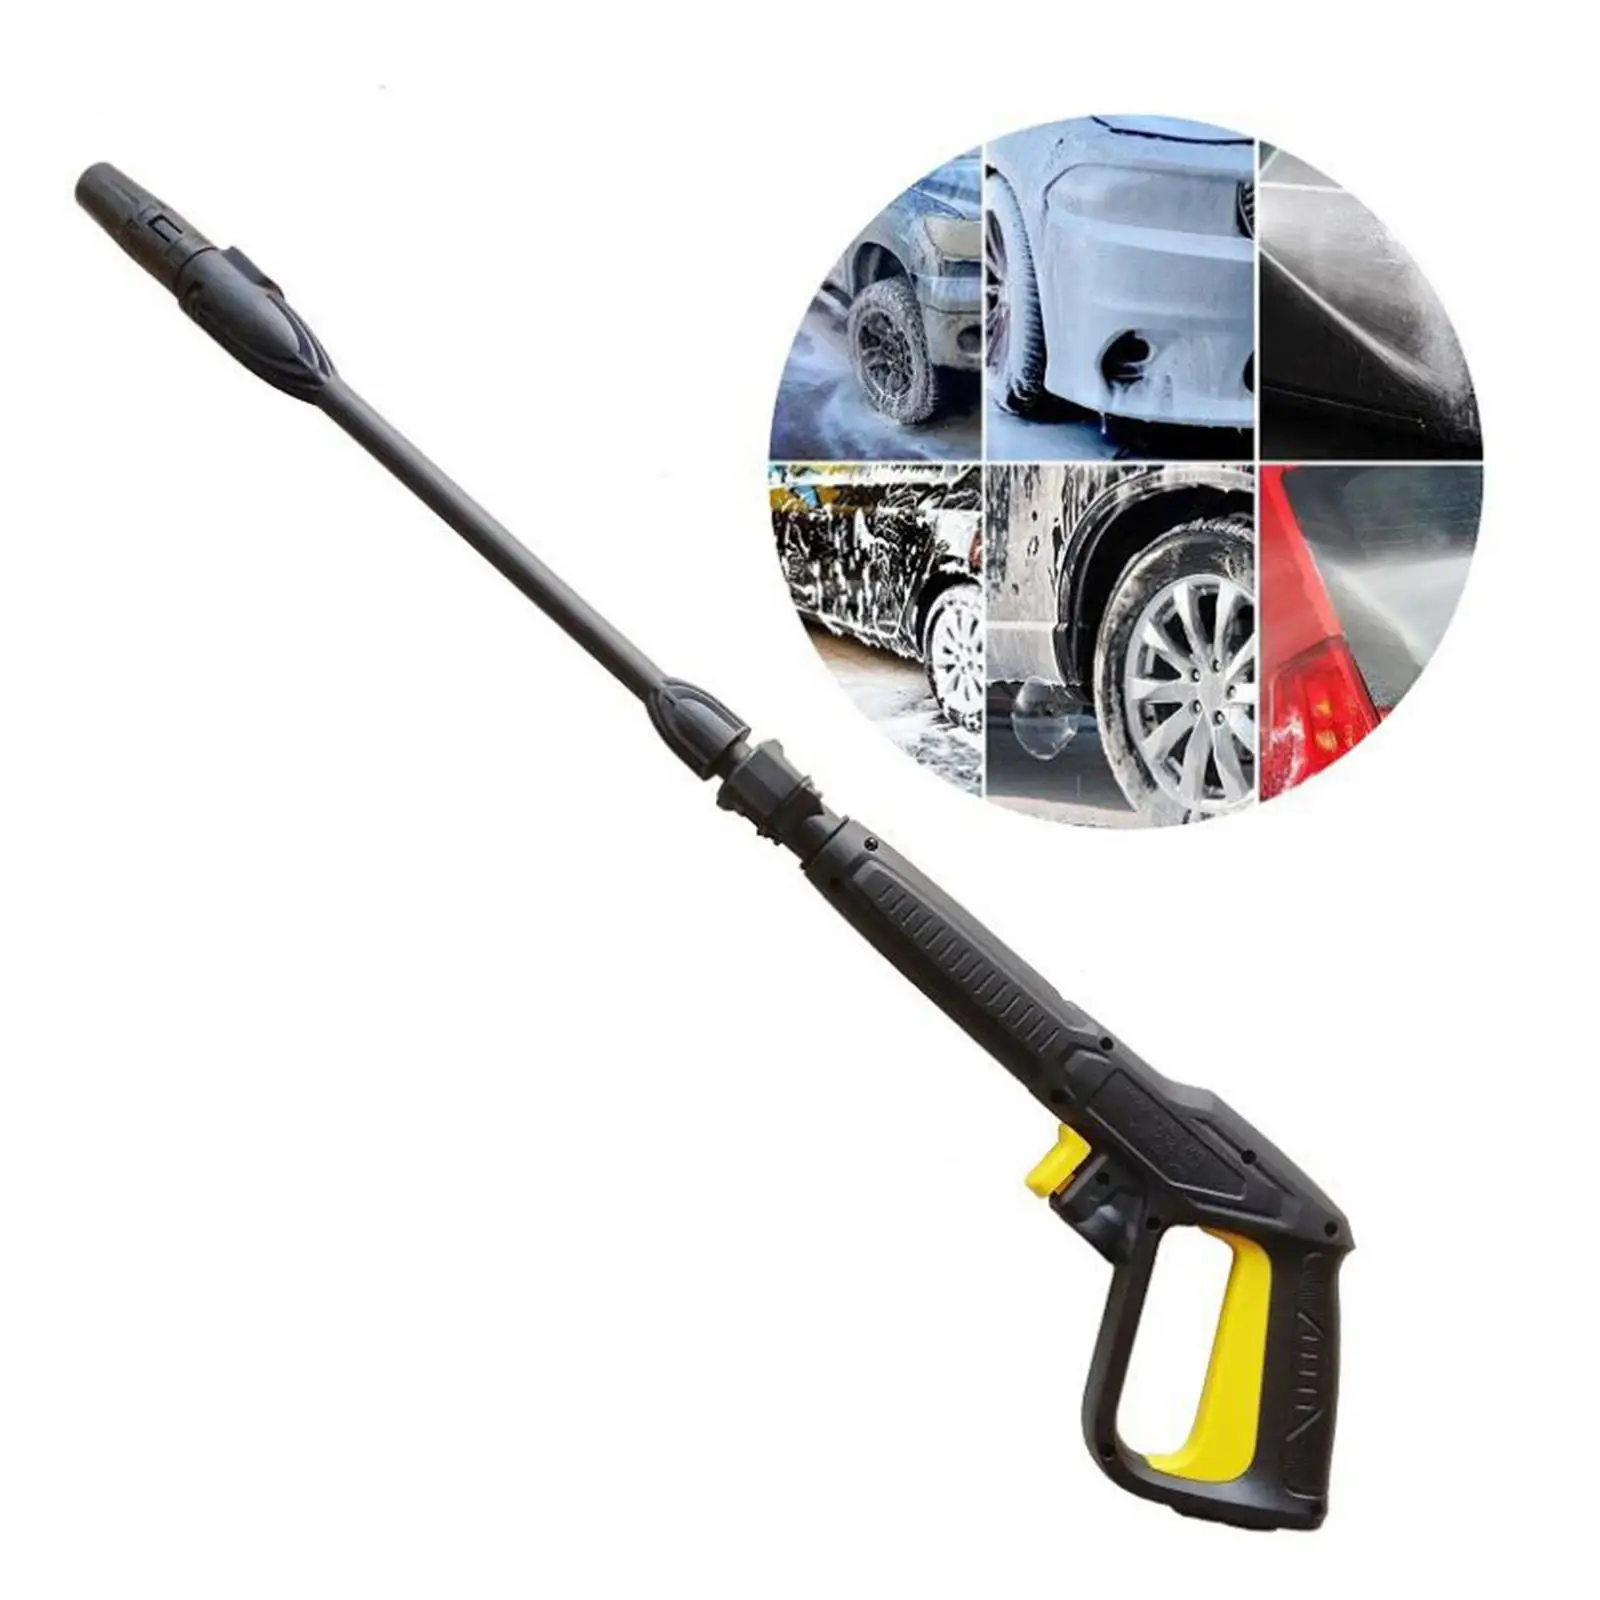 Pressure Washer Spray Gun 2175 PSI High Power with Extension Wand Car Washer for  K-series Garden Watering